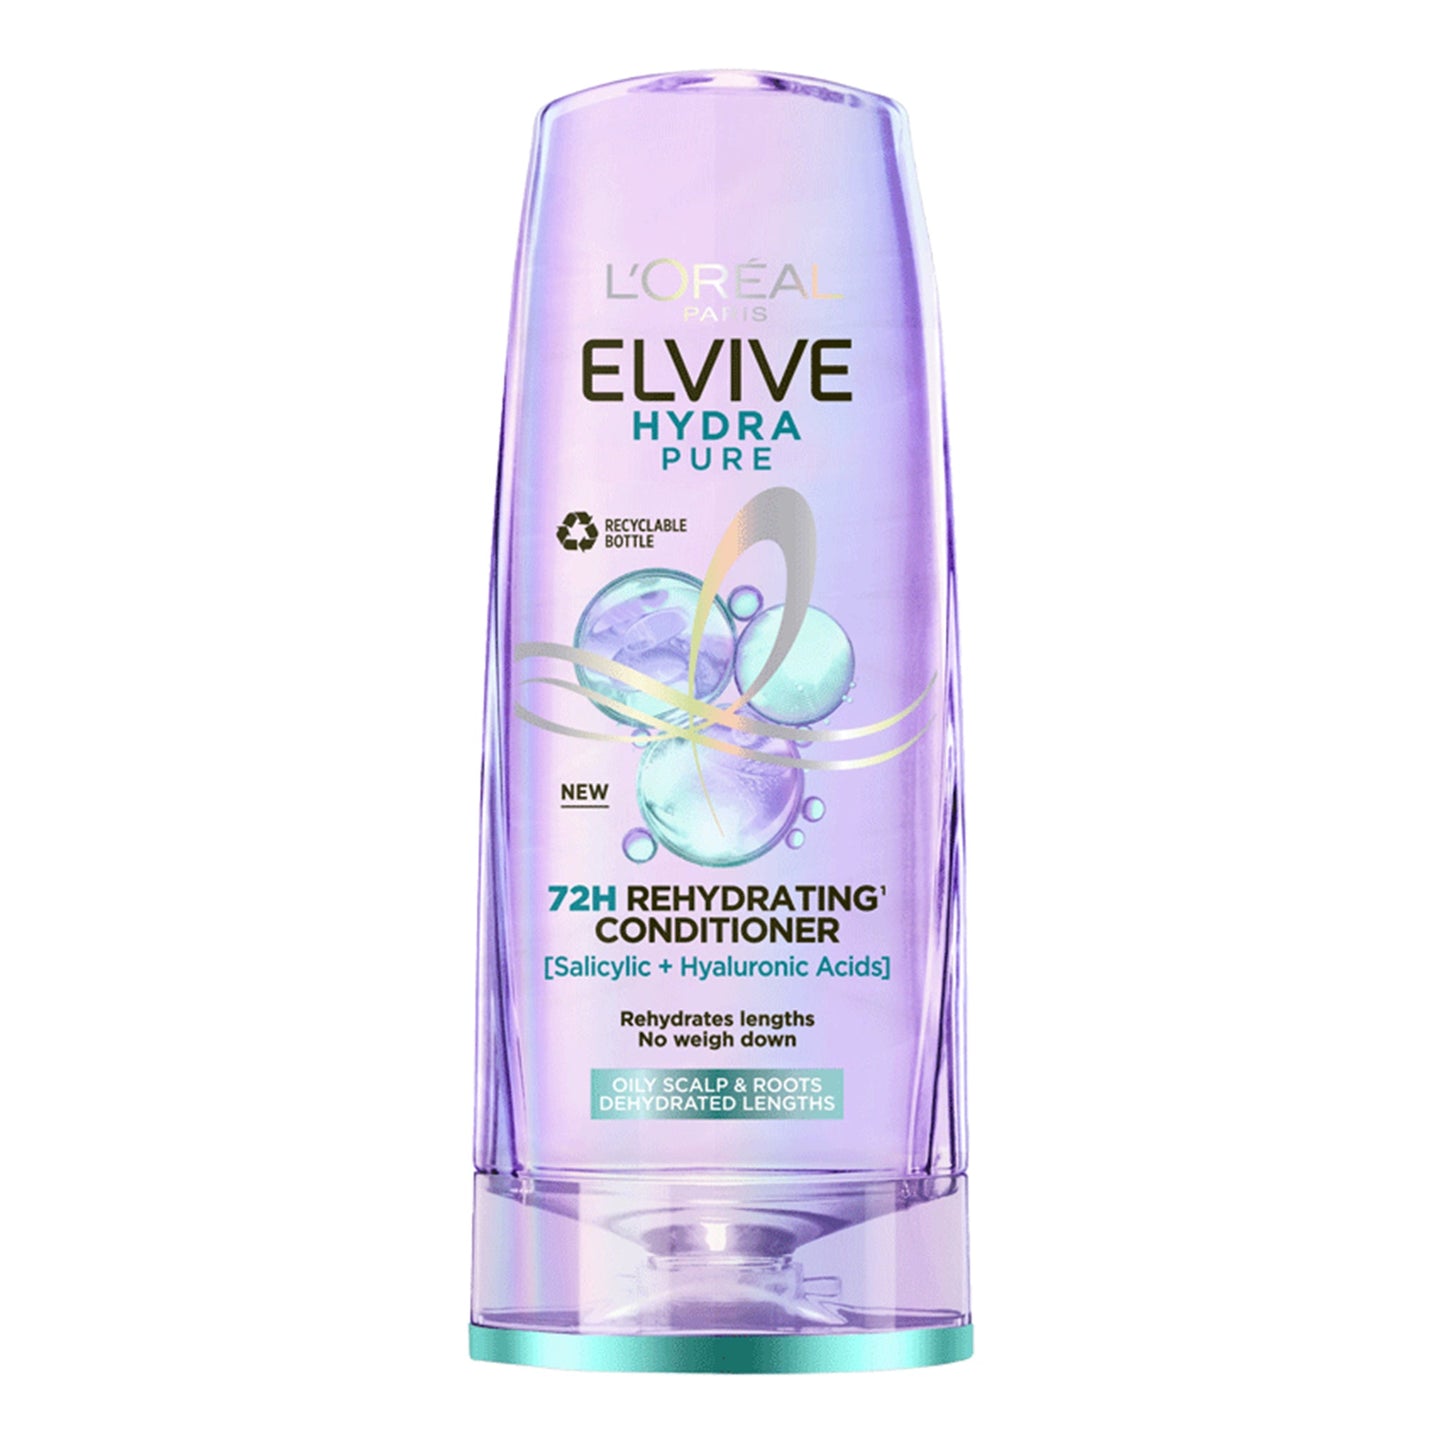 L'OREAL PARIS - ELVIVE HYDRA PURE 72H REHYDRATING CONDITIONER WITH SALICYLIC + HYALURONIC ACIDS - 300ML